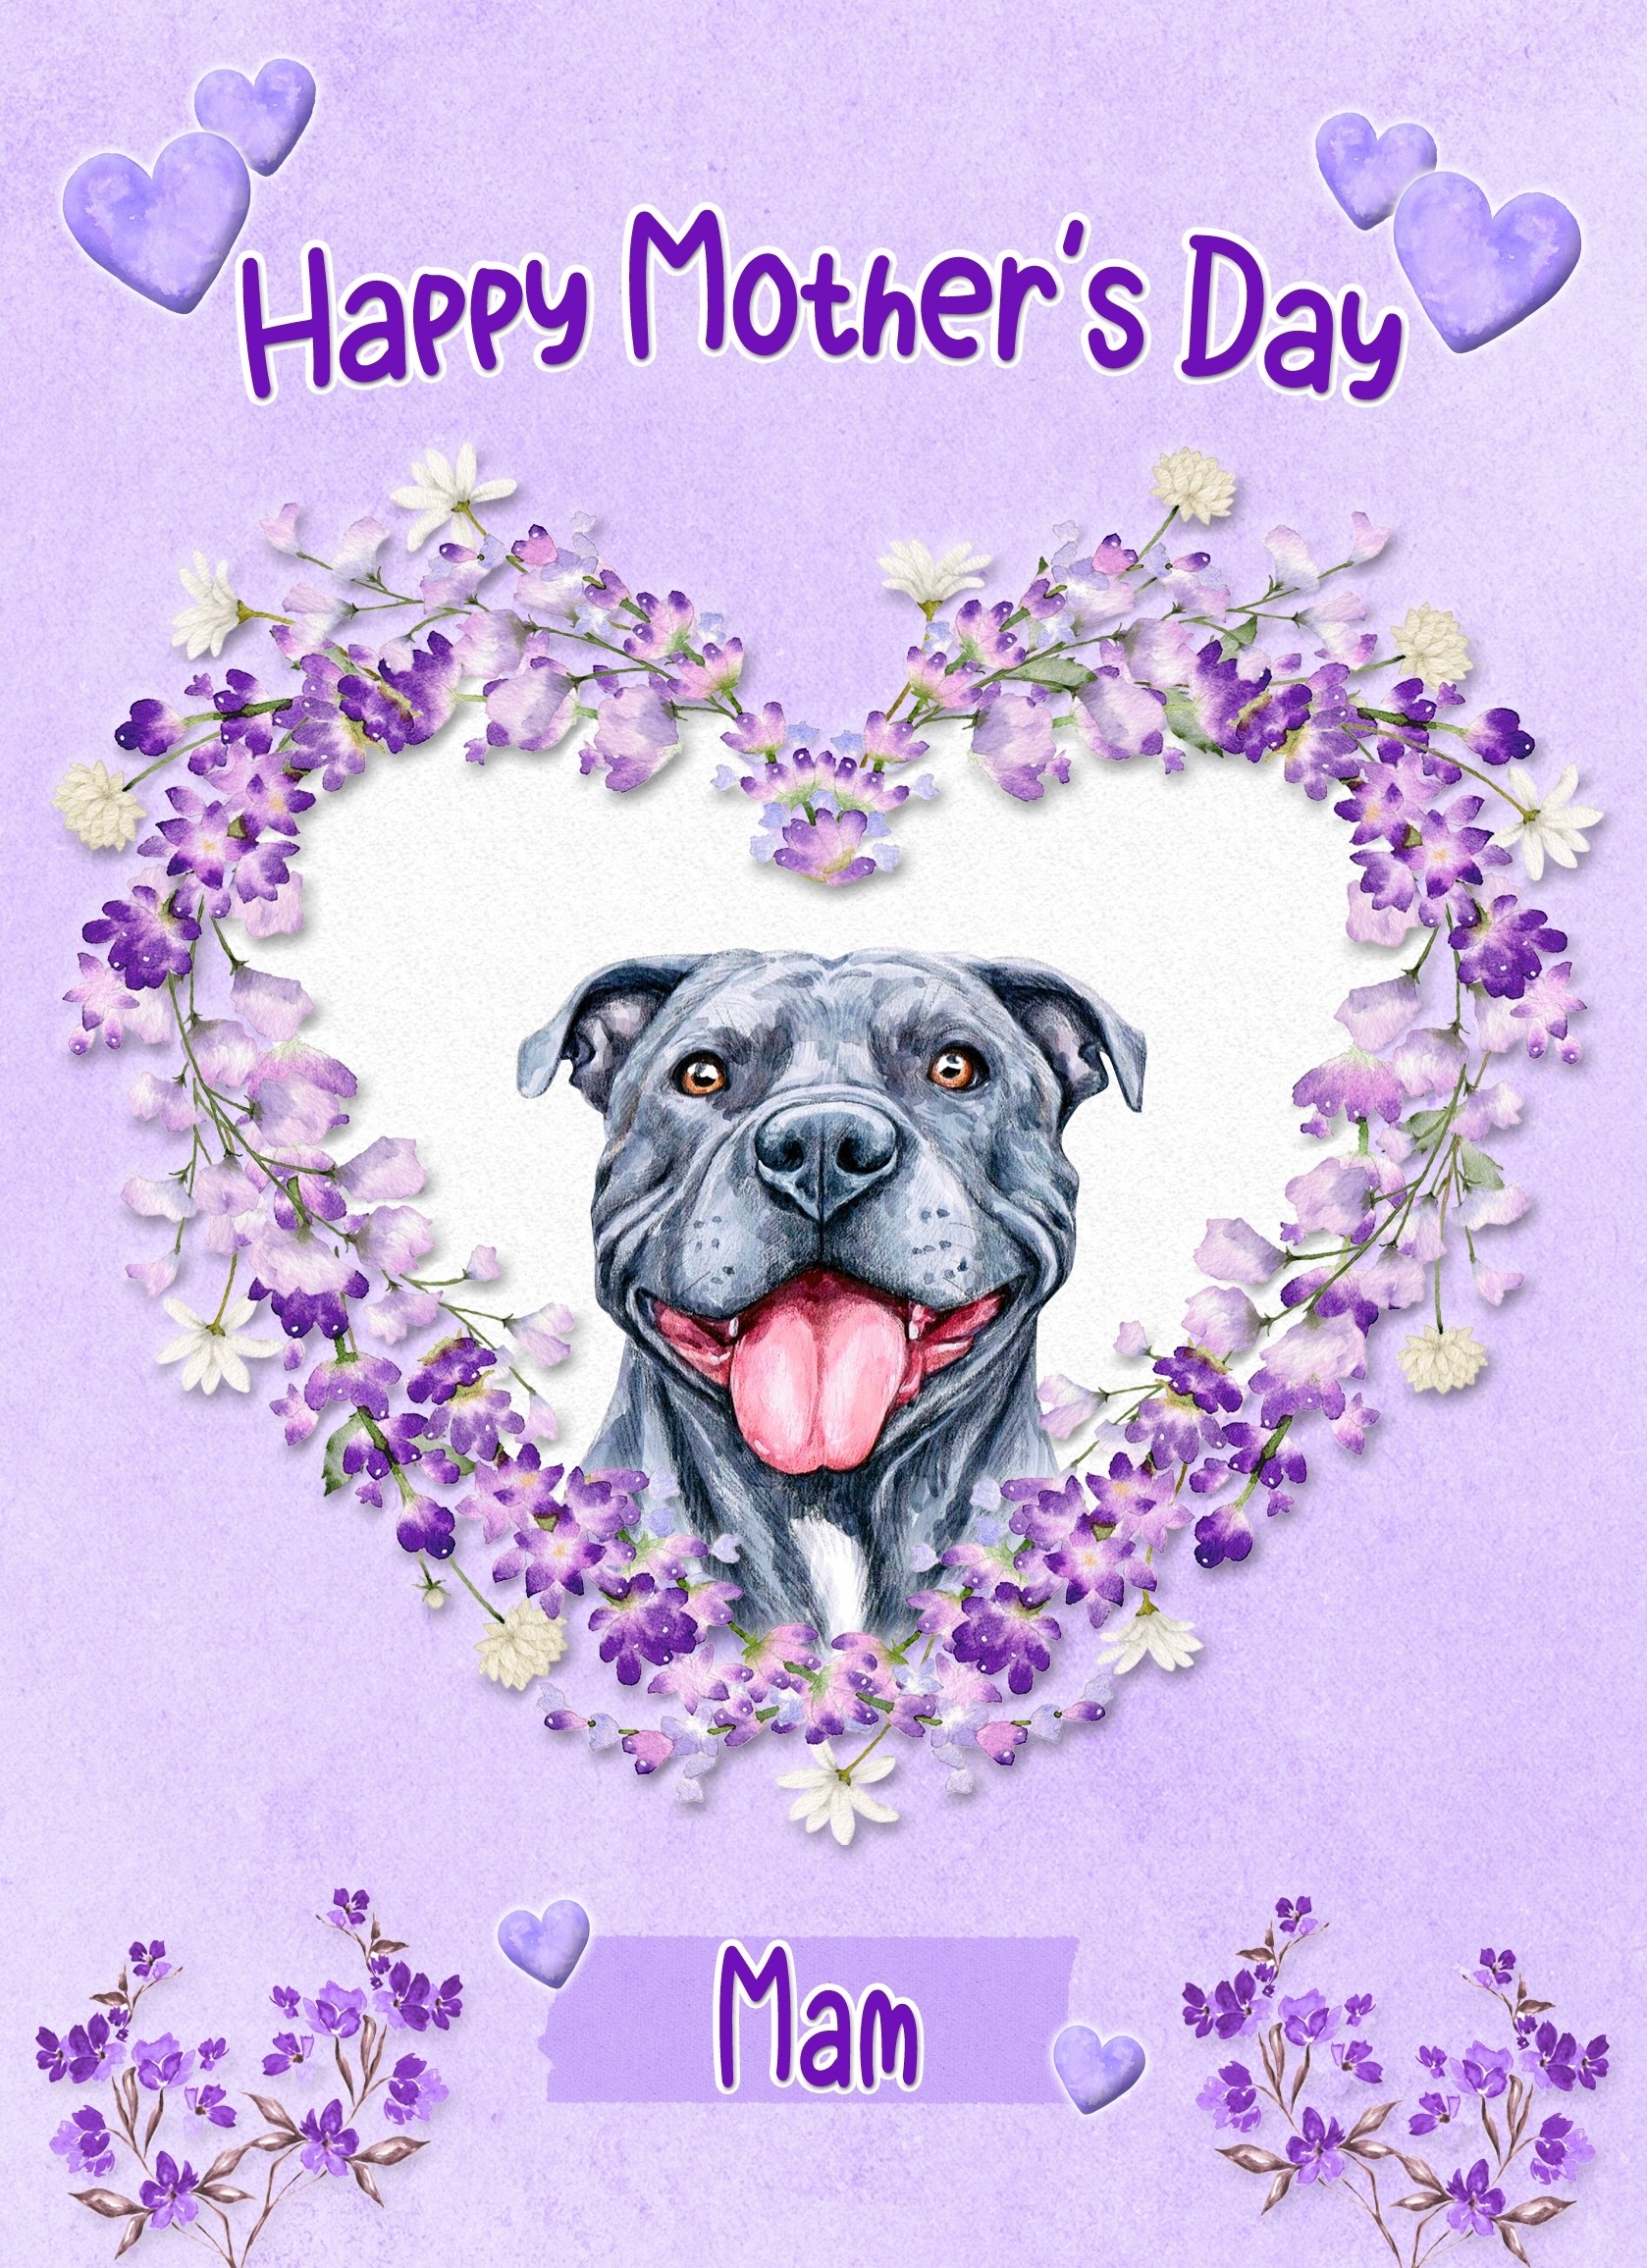 Staffordshire Bull Terrier Dog Mothers Day Card (Happy Mothers, Mam)